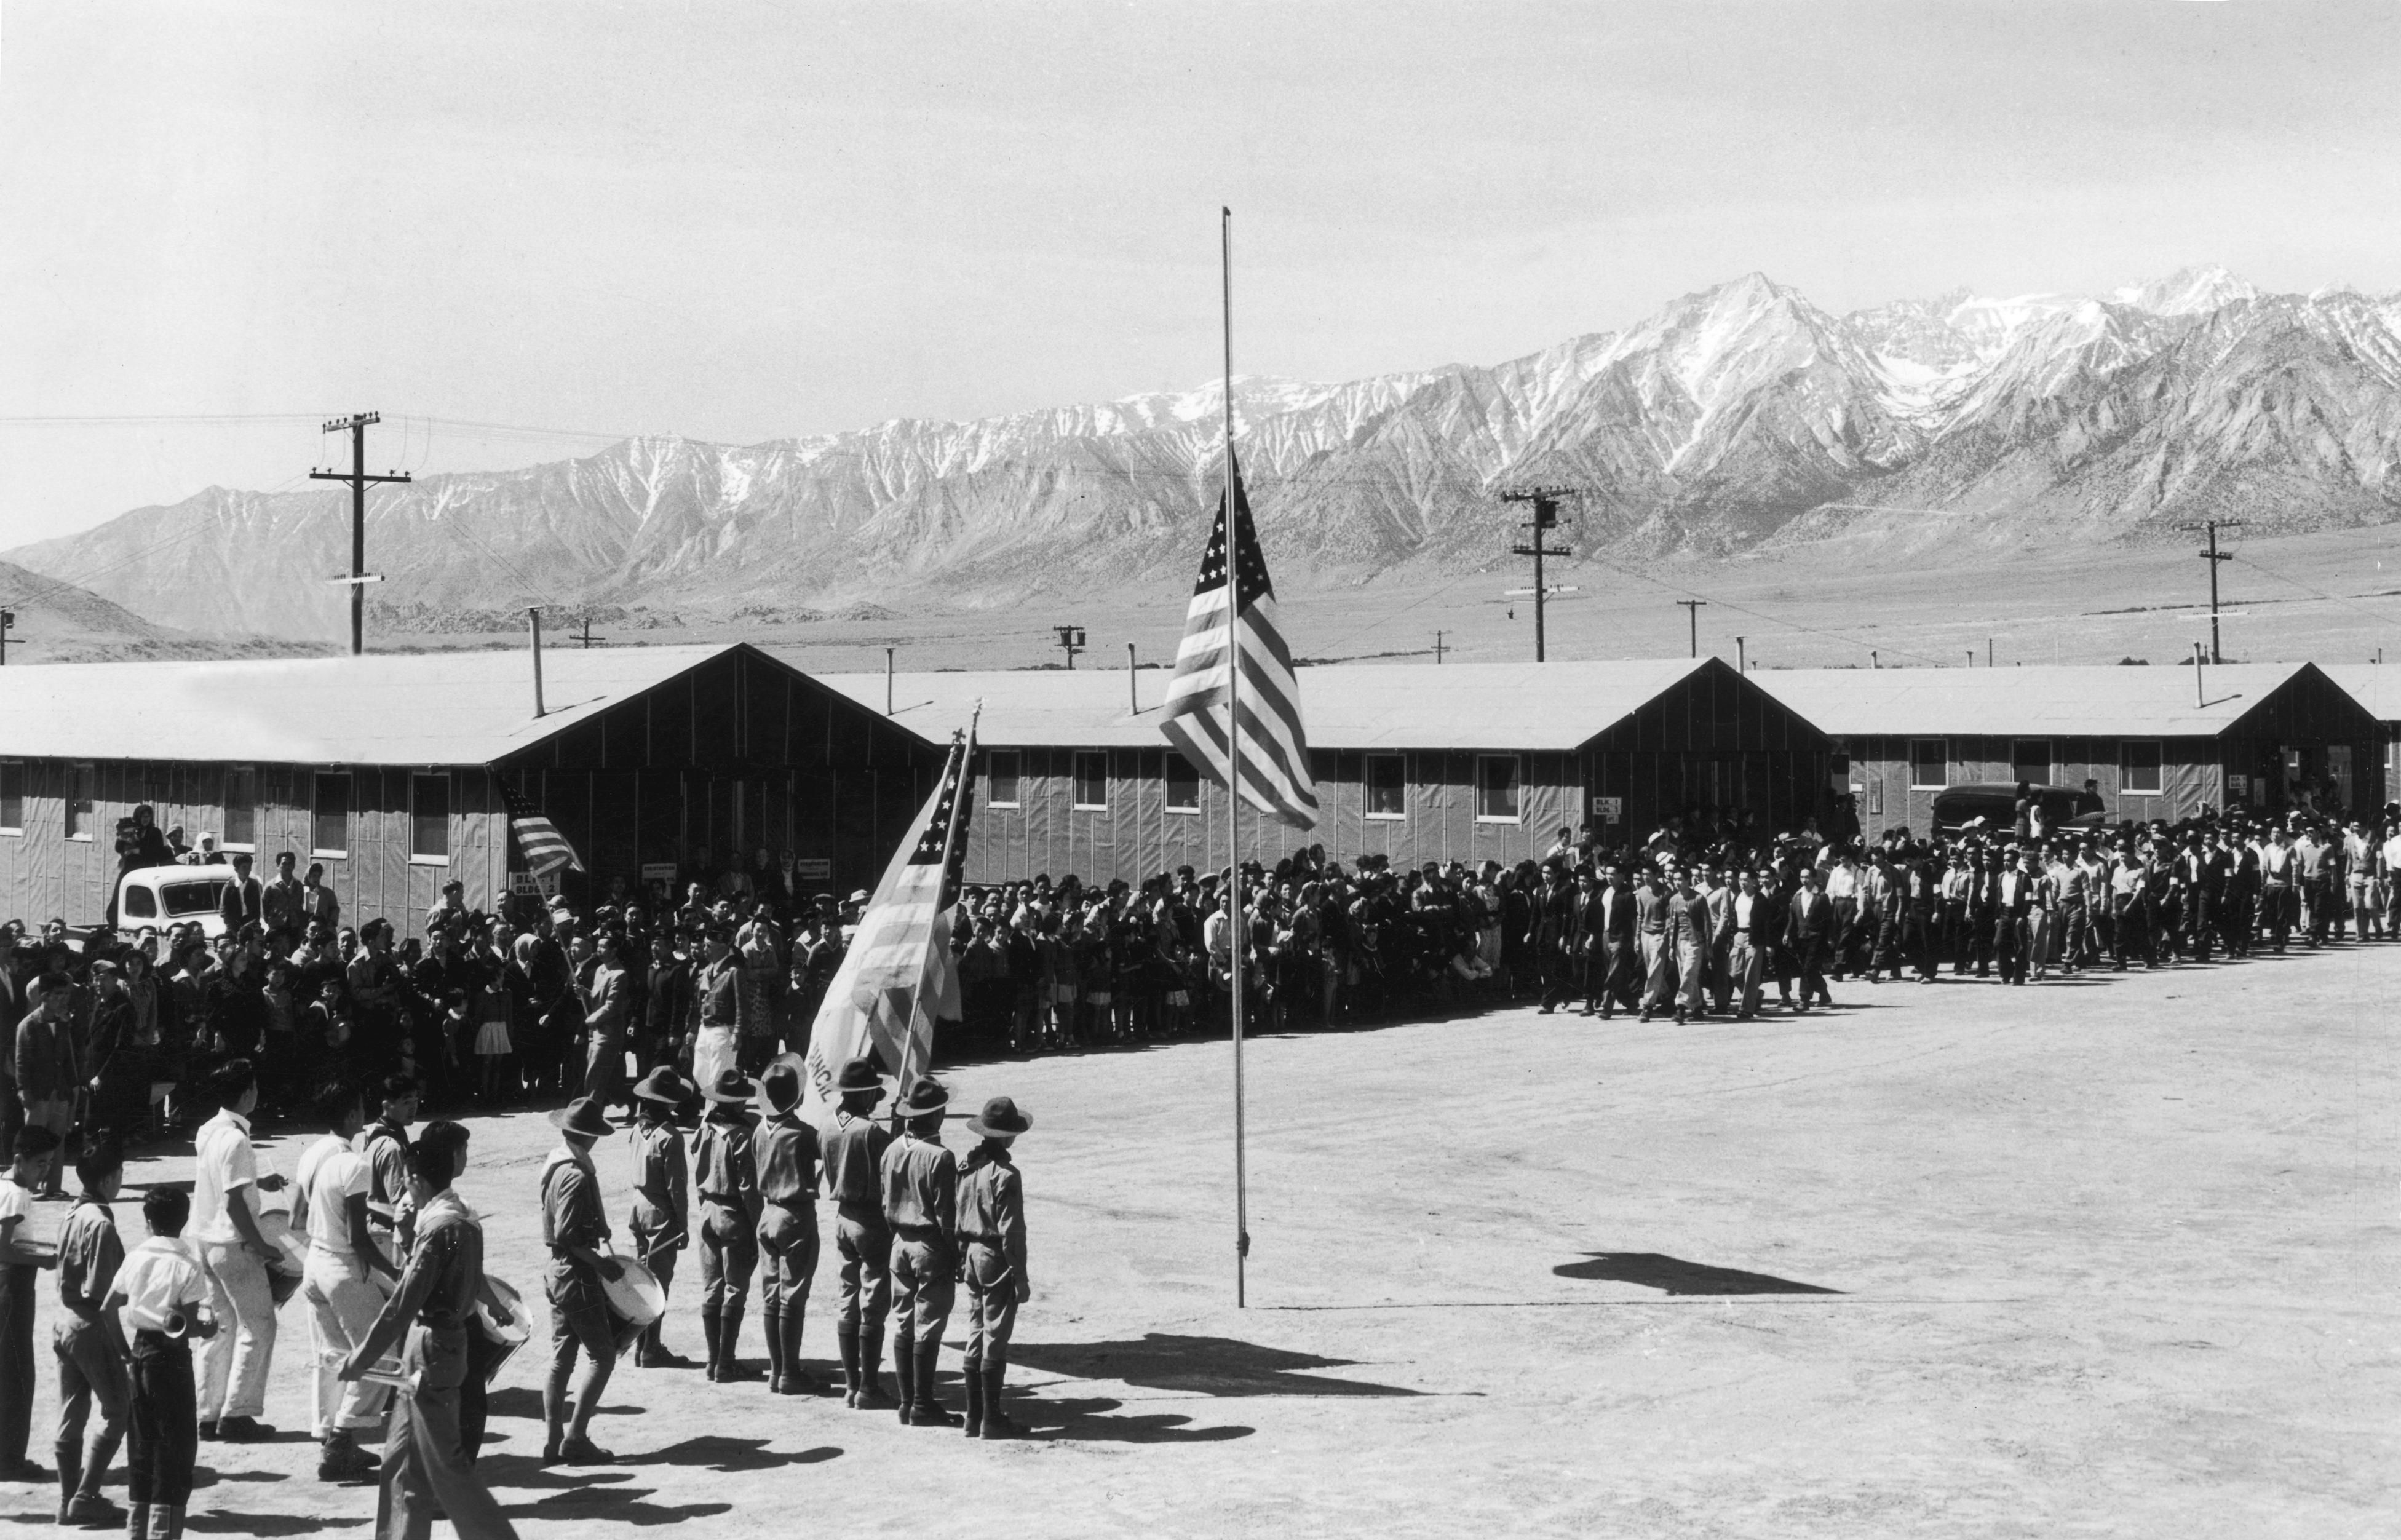  After the attack on Pearl Harbor, President Franklin D. Roosevelt issued Executive Order 9066, under which all people of Japanese ancestry living on the West Coast were rounded up and imprisoned in dozens of civilian assembly centers (where they were often forced to sleep in crowded, manure-covered horse stables), relocation centers, military bases, and “citizen isolation centers.” (Photo: Hulton Archive/Getty Images)